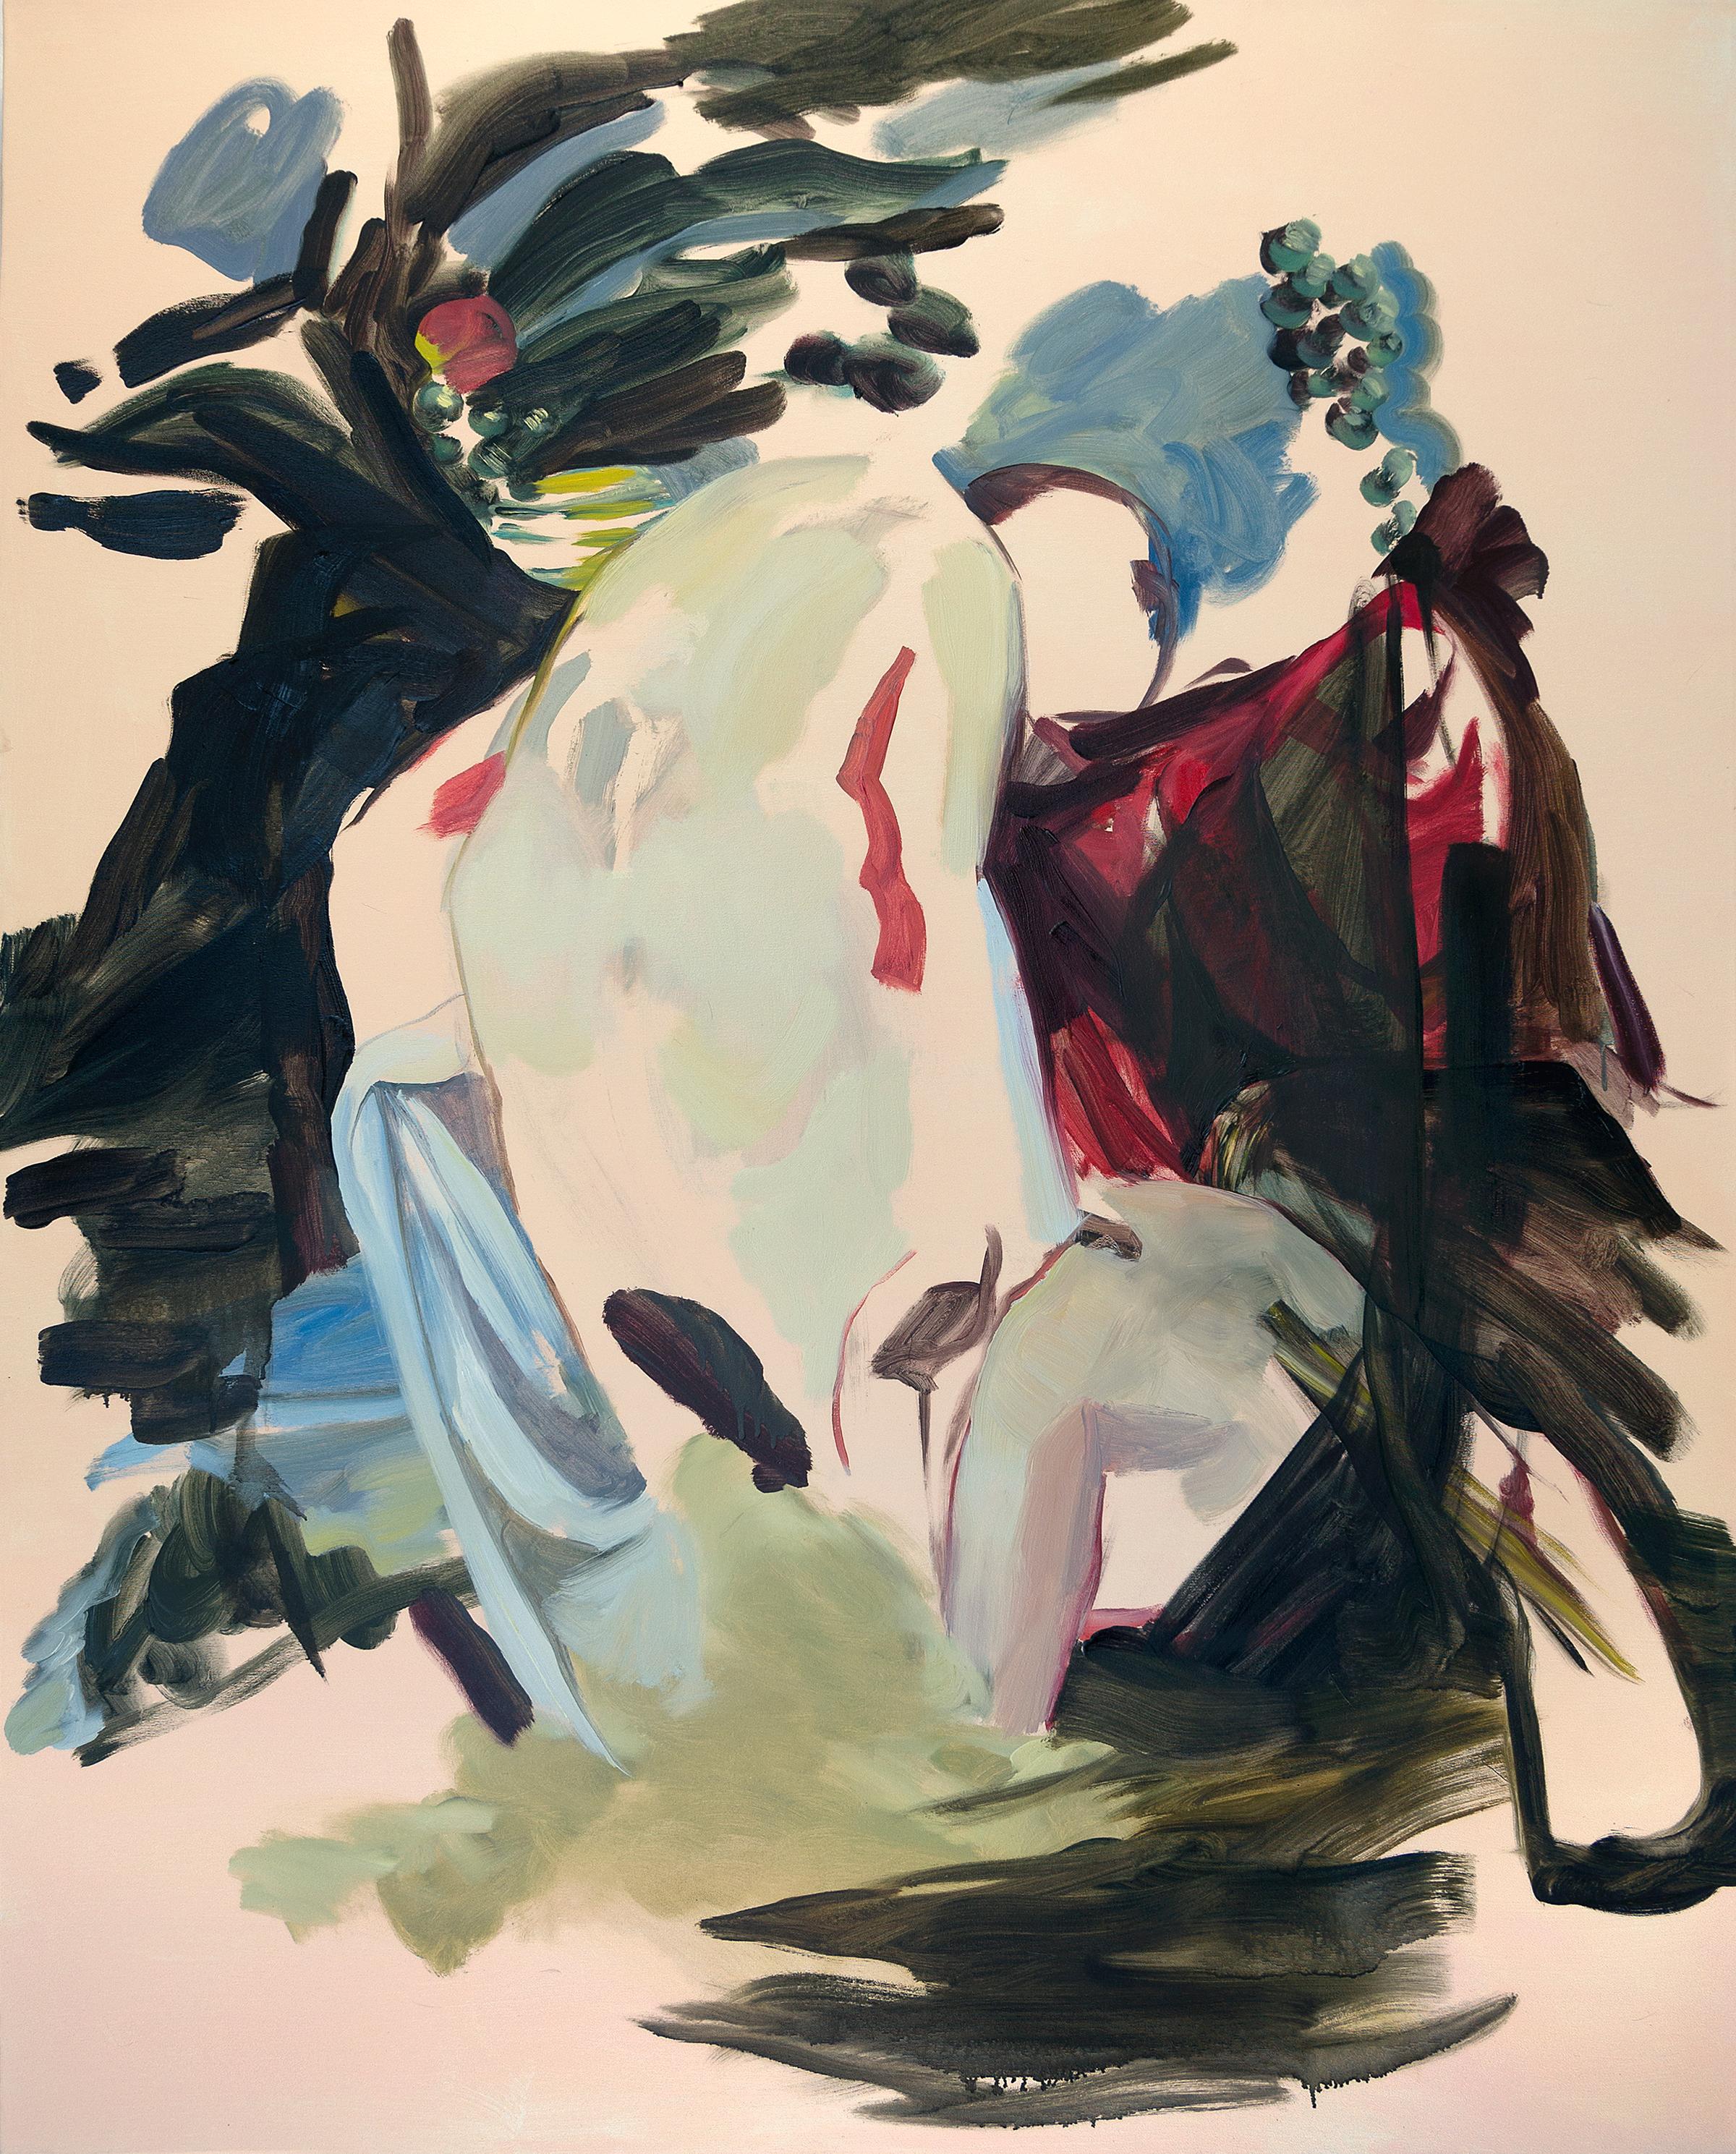 Tiffany Calvert's Untitled 276 is a large abstract painting made from acrylic and oil on canvas. Tiffany Calvert’s paintings draw on historical and contemporary imagery to explore the shifting nature of perception. Her work is primarily concerned